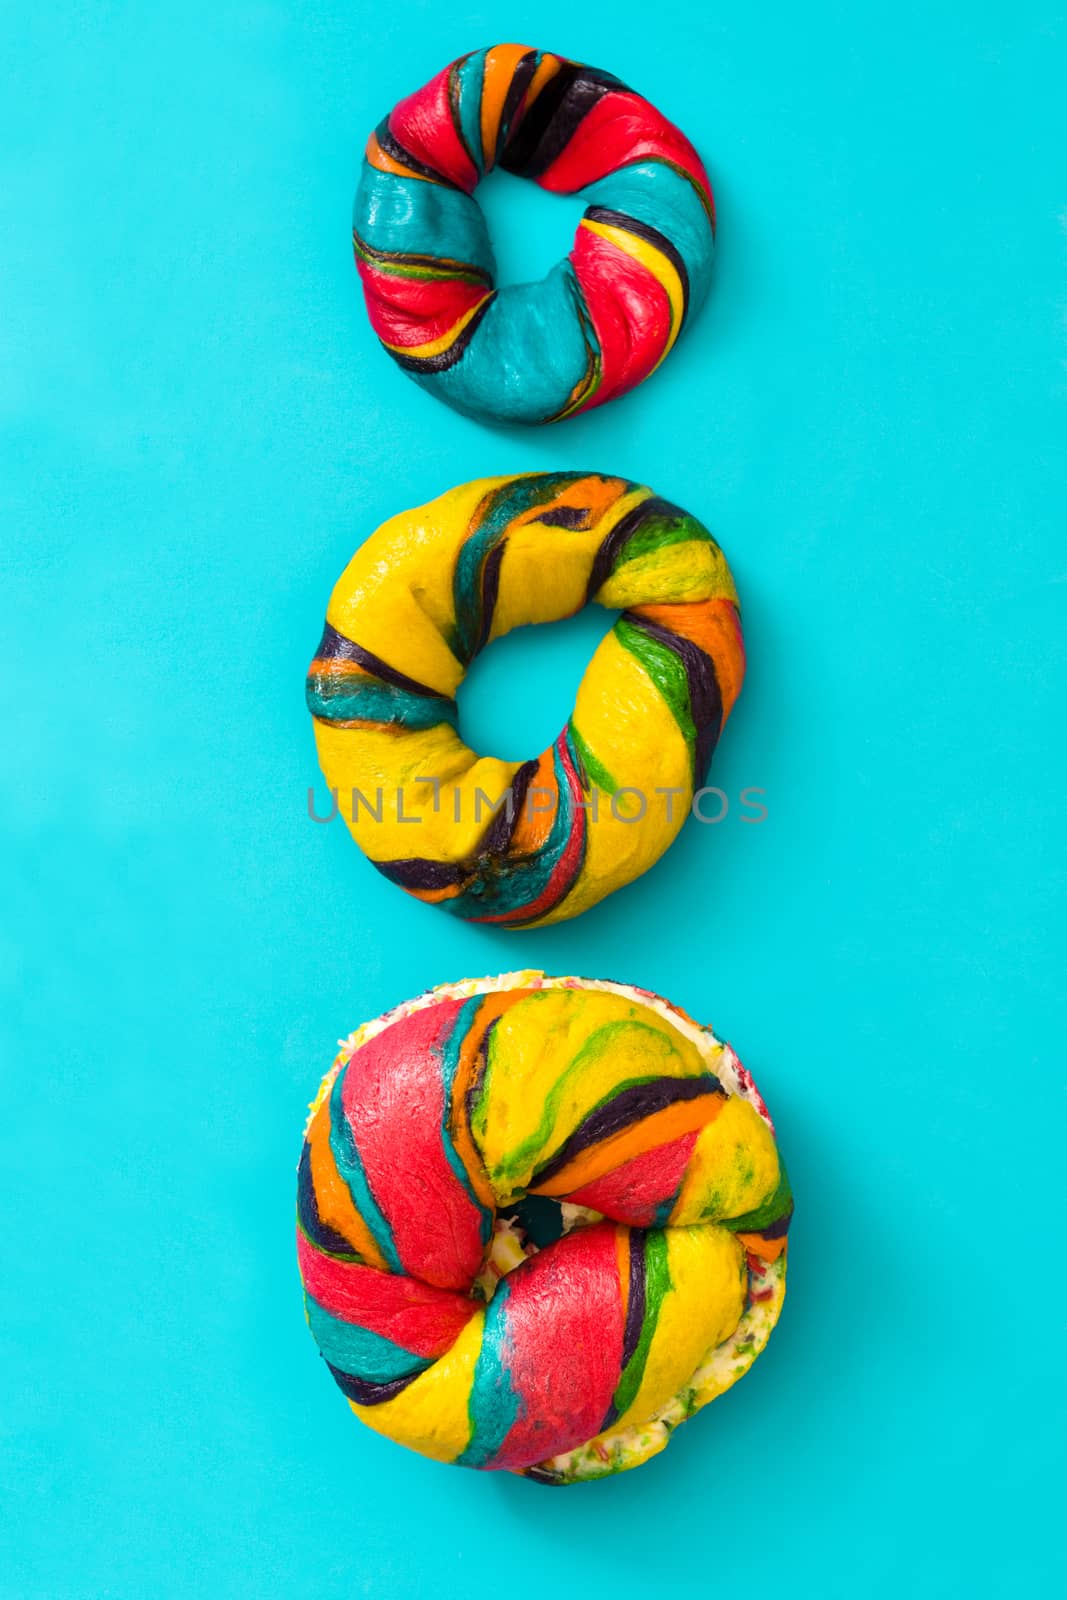 Colorful bagel on blue background by chandlervid85